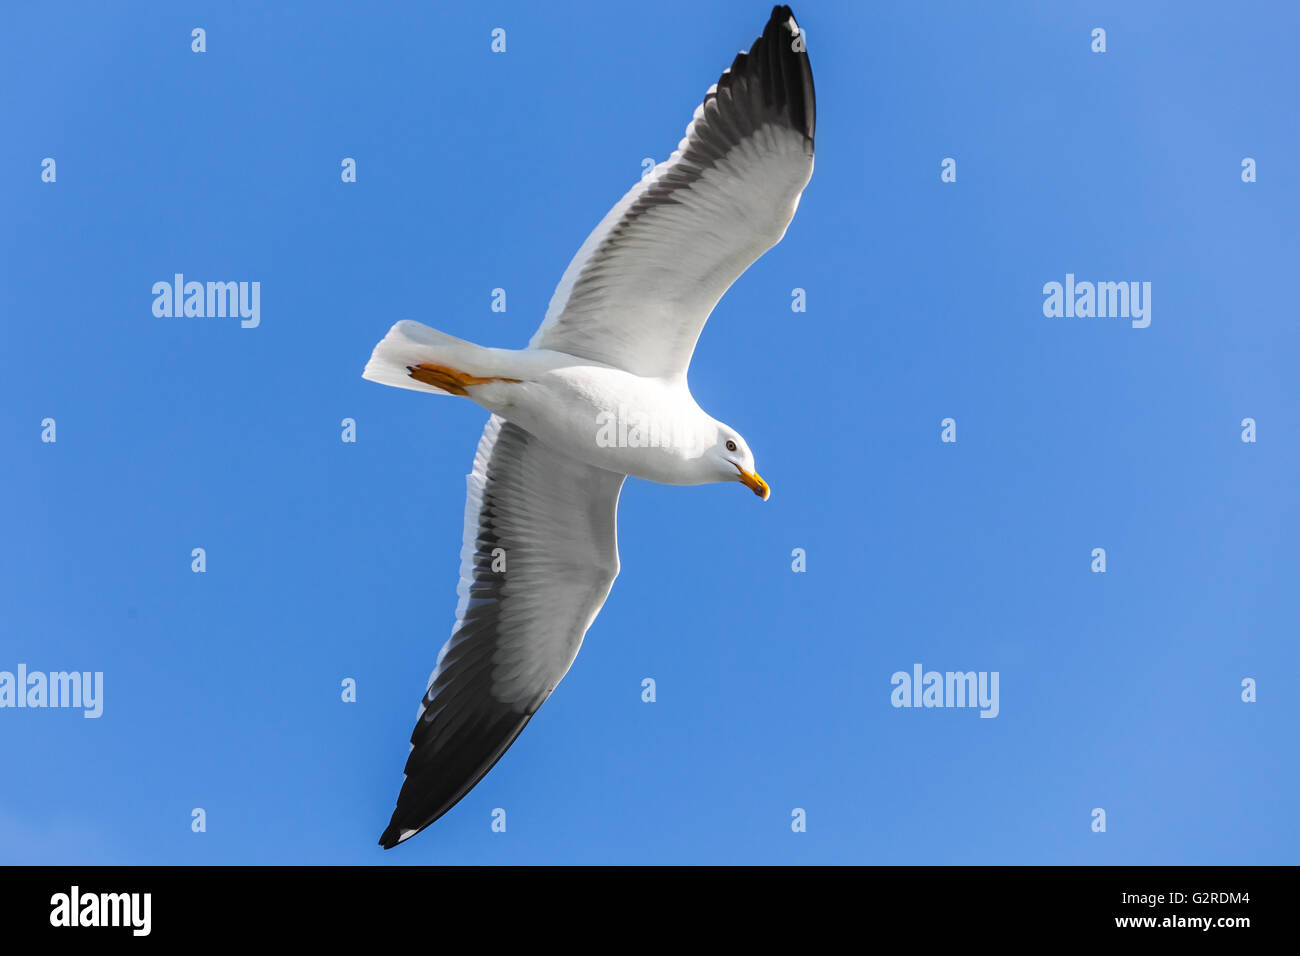 Great black-backed gull. Big white seagull flying in clear blue sky, closeup photo Stock Photo